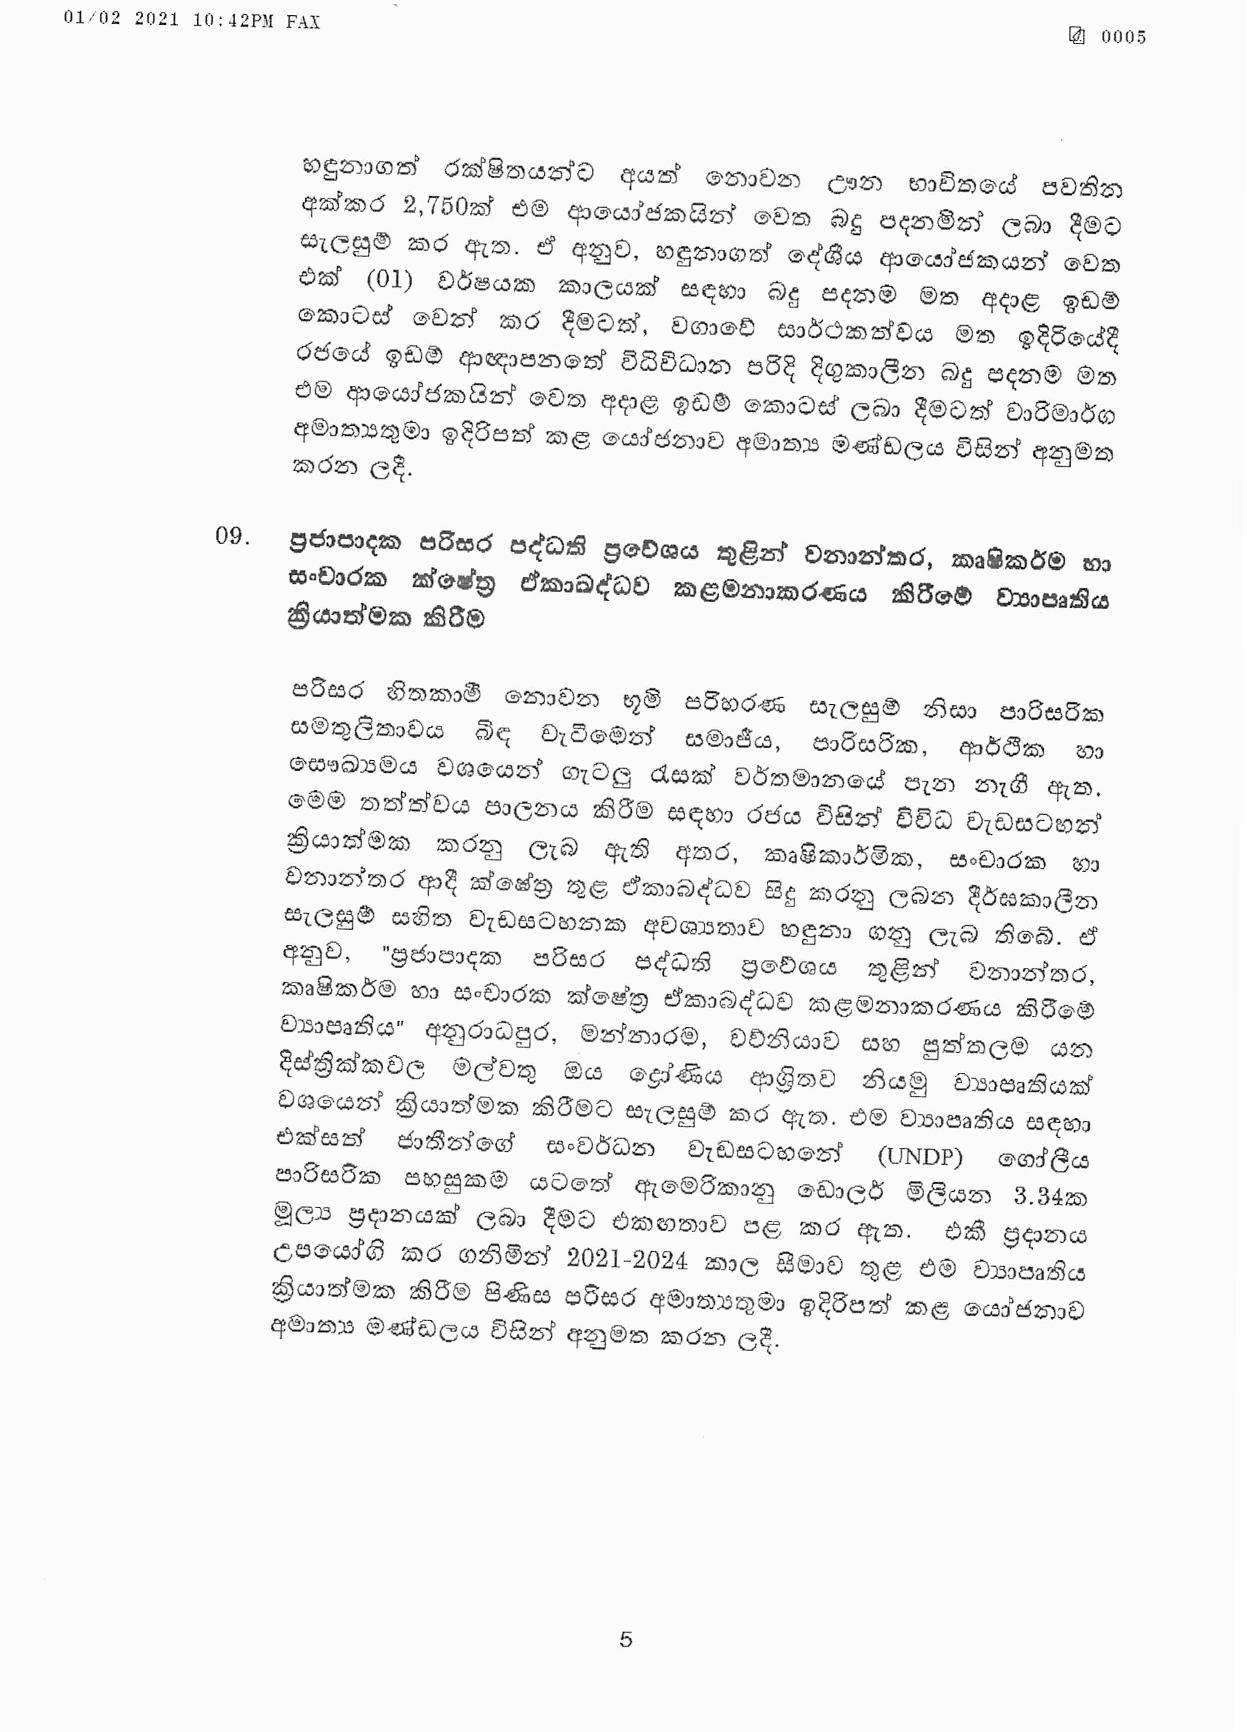 Cabinet Decision on 01.02.2021 page 005